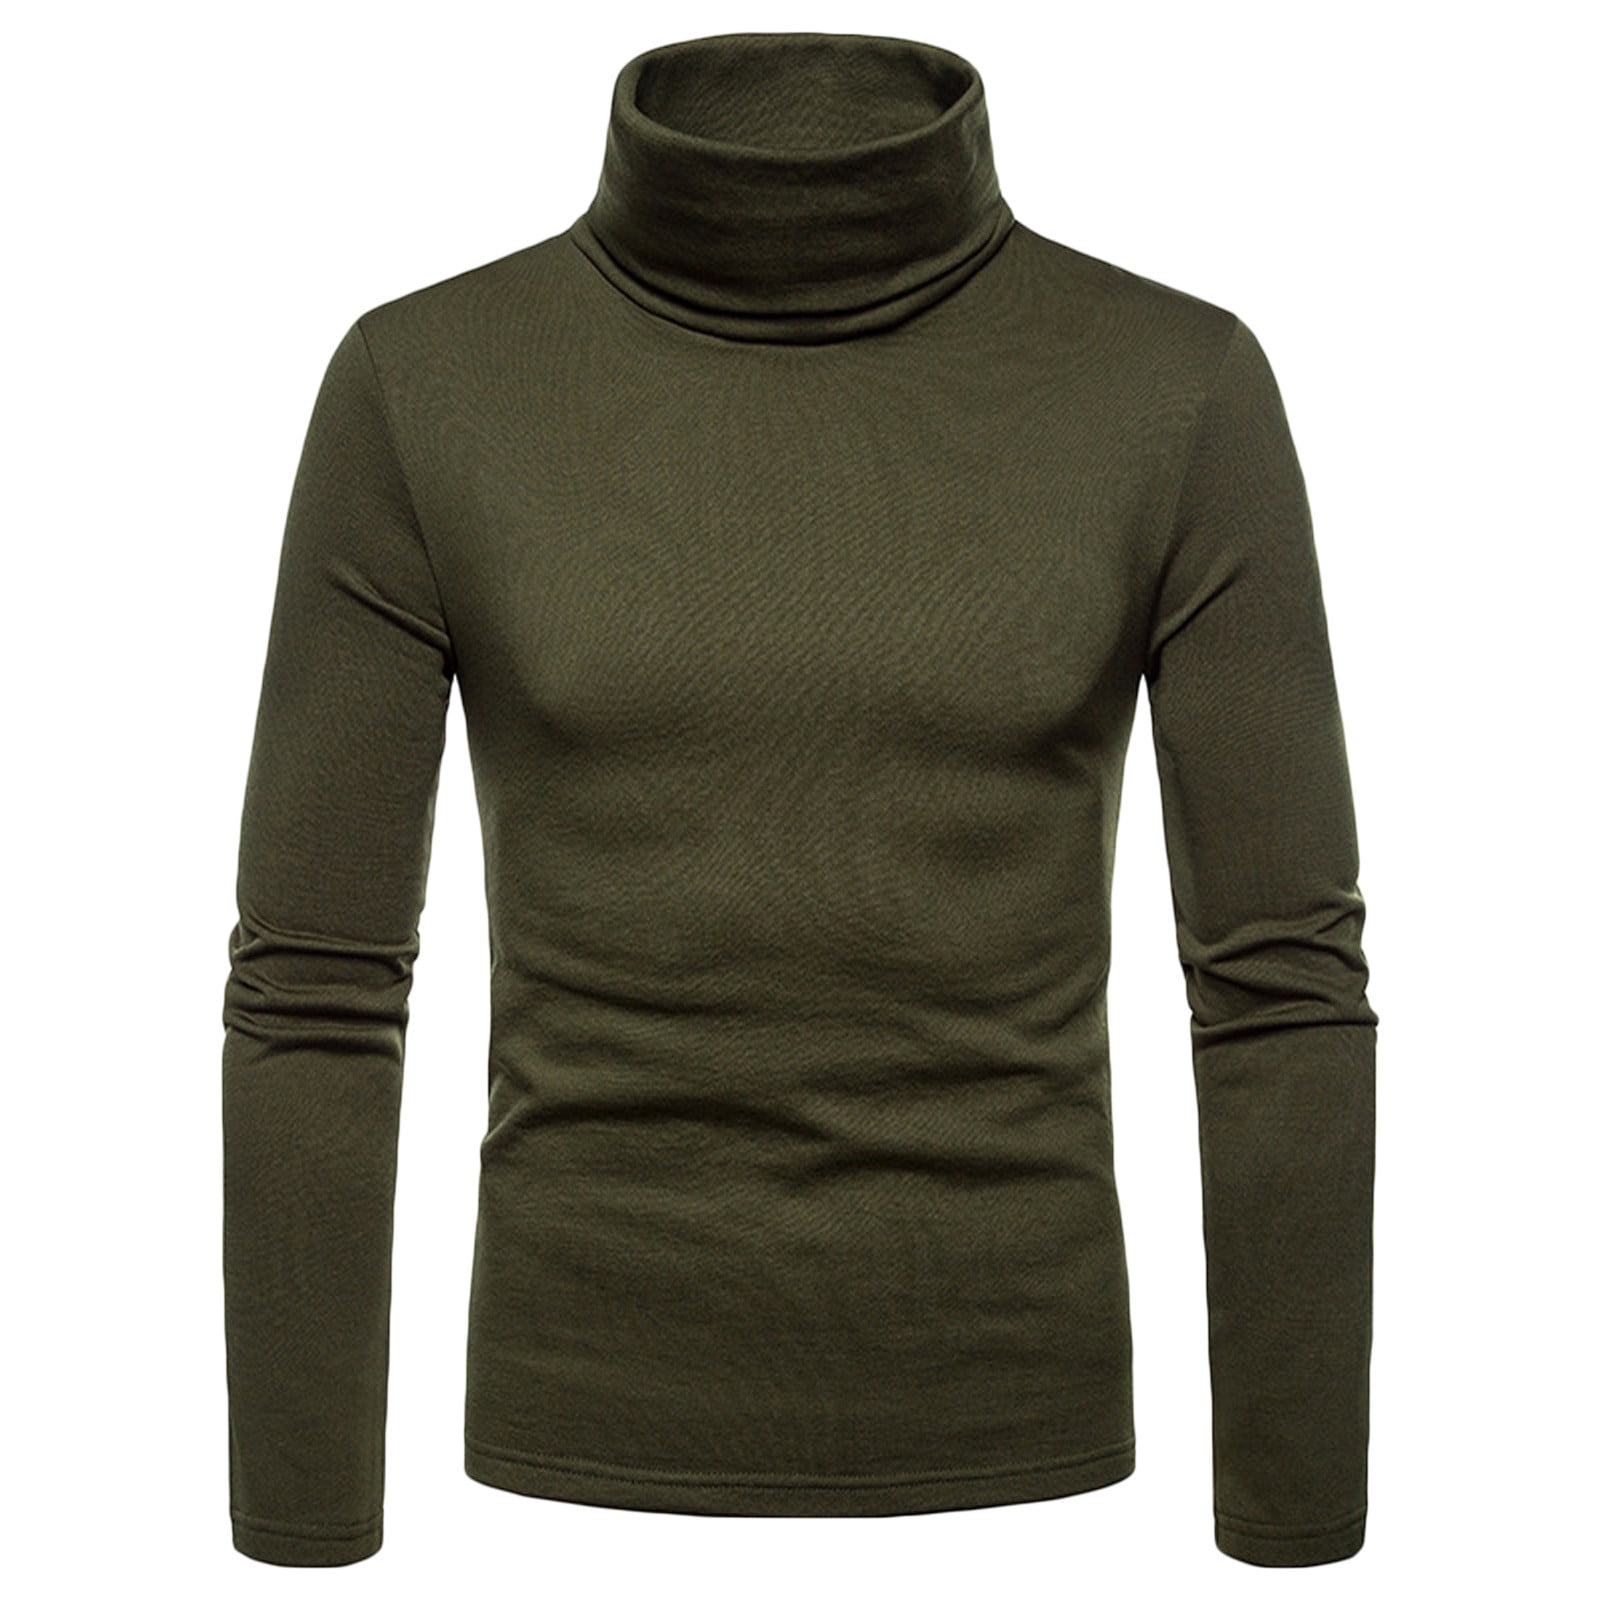 Men's Slim Fit Turtleneck Pullover Basic Tops Knitted Thermal Sweater  Casual Long Sleeve Fleece T-Shirt Lightweight Sweatshirts 